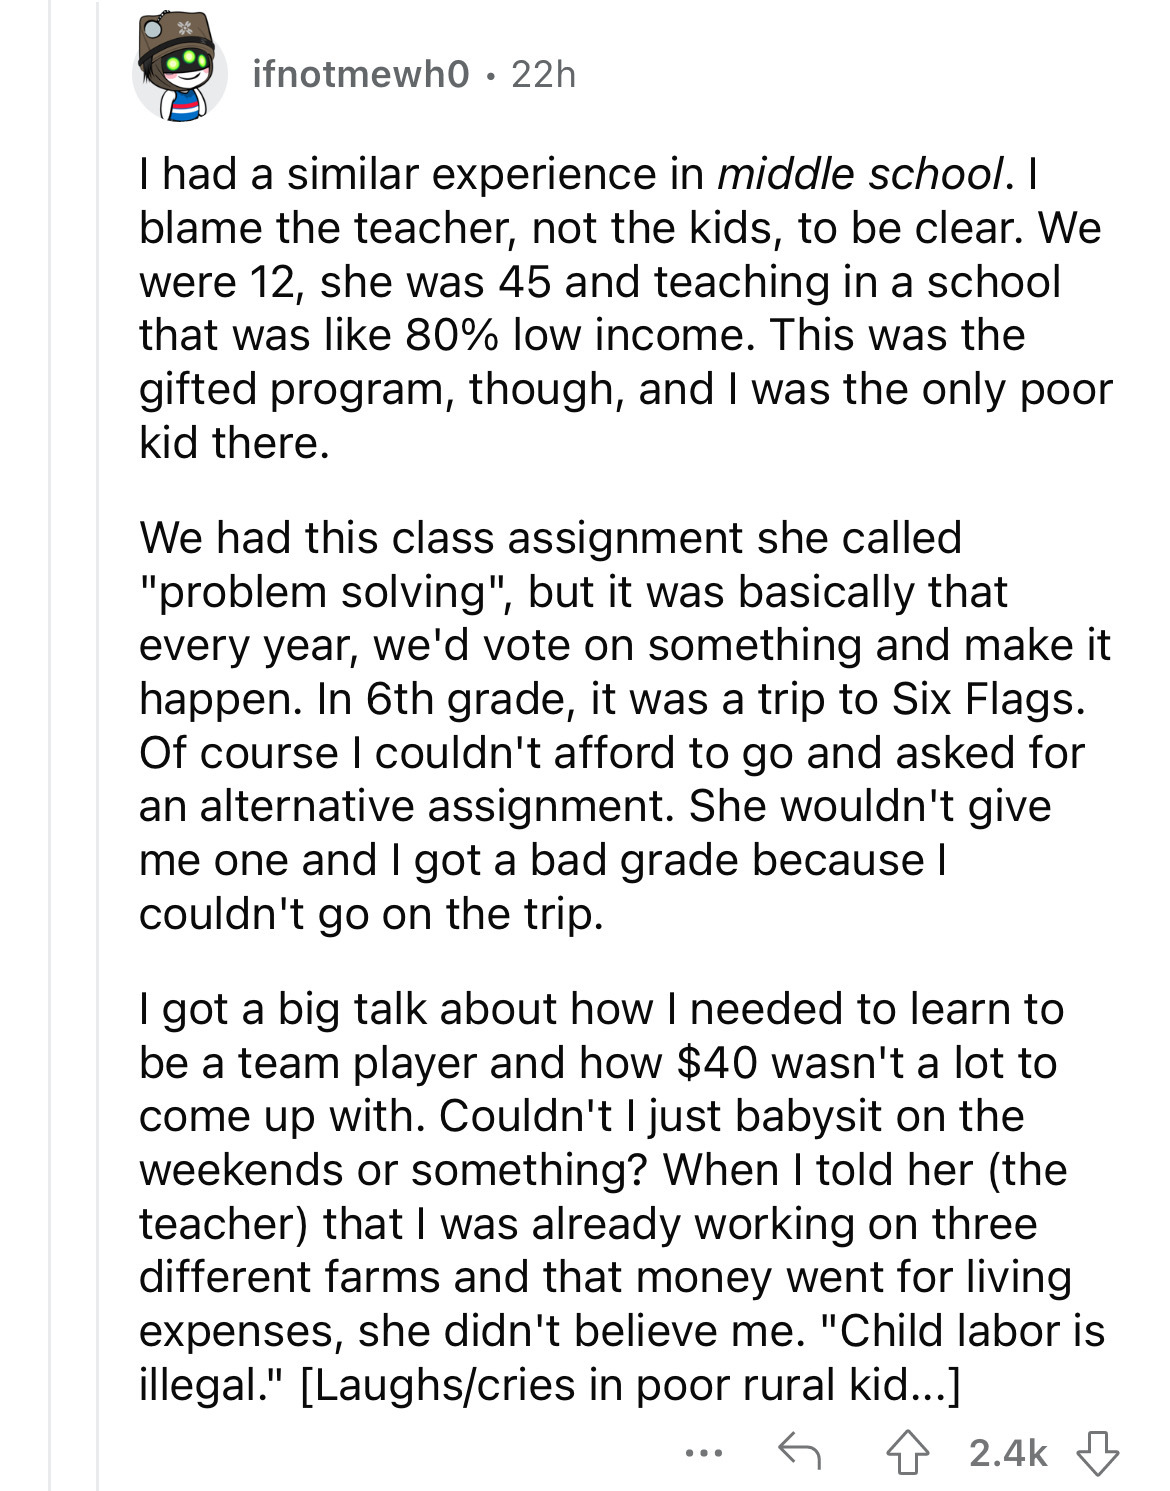 document - ifnotmewh0. 22h I had a similar experience in middle school. I blame the teacher, not the kids, to be clear. We were 12, she was 45 and teaching in a school that was 80% low income. This was the gifted program, though, and I was the only poor k